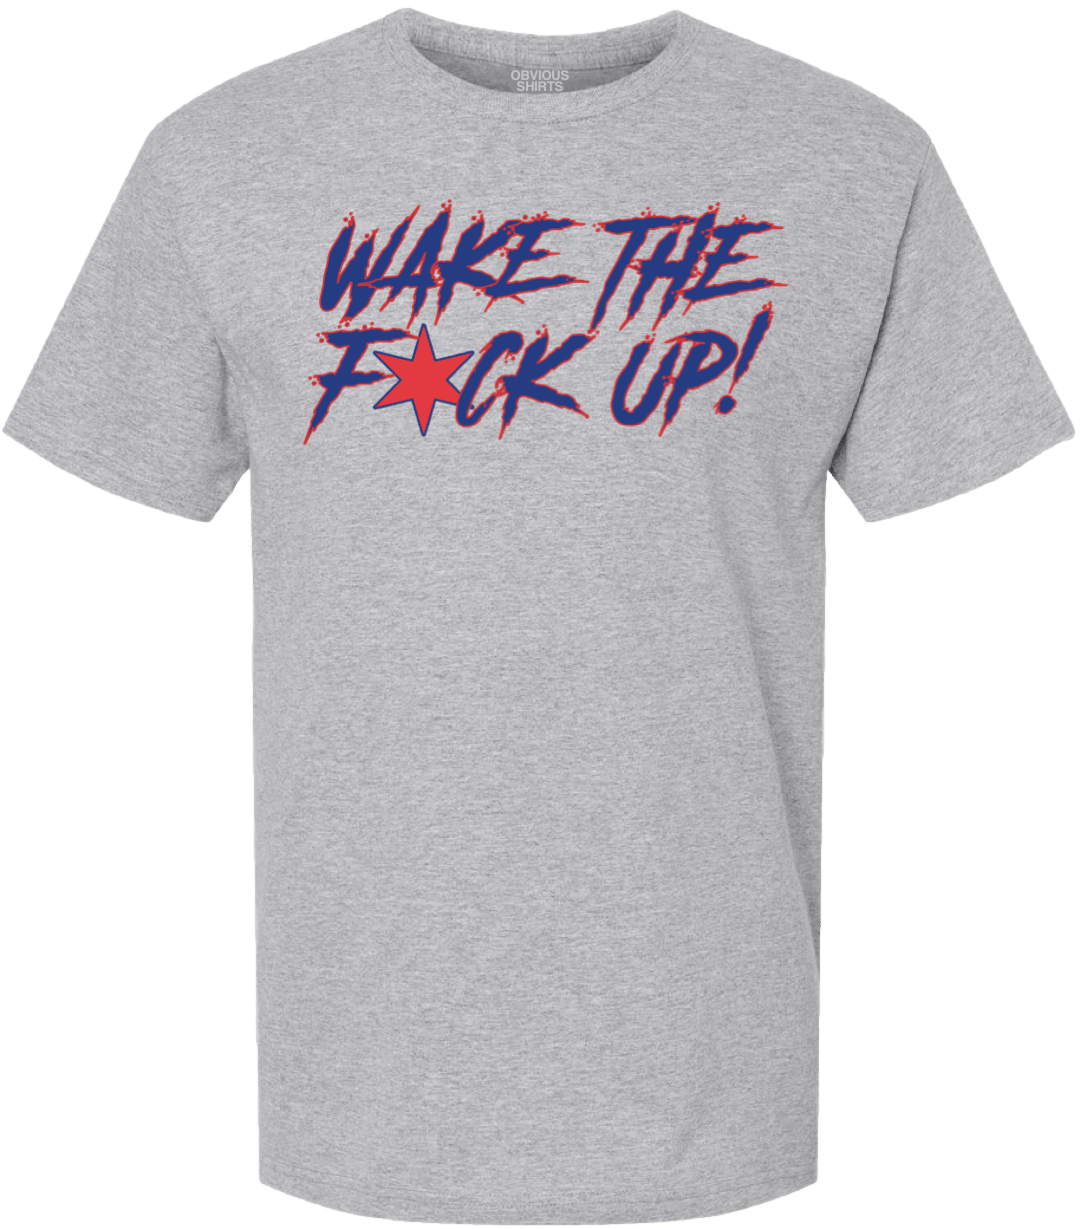 WAKE THE F*CK UP! - OBVIOUS SHIRTS